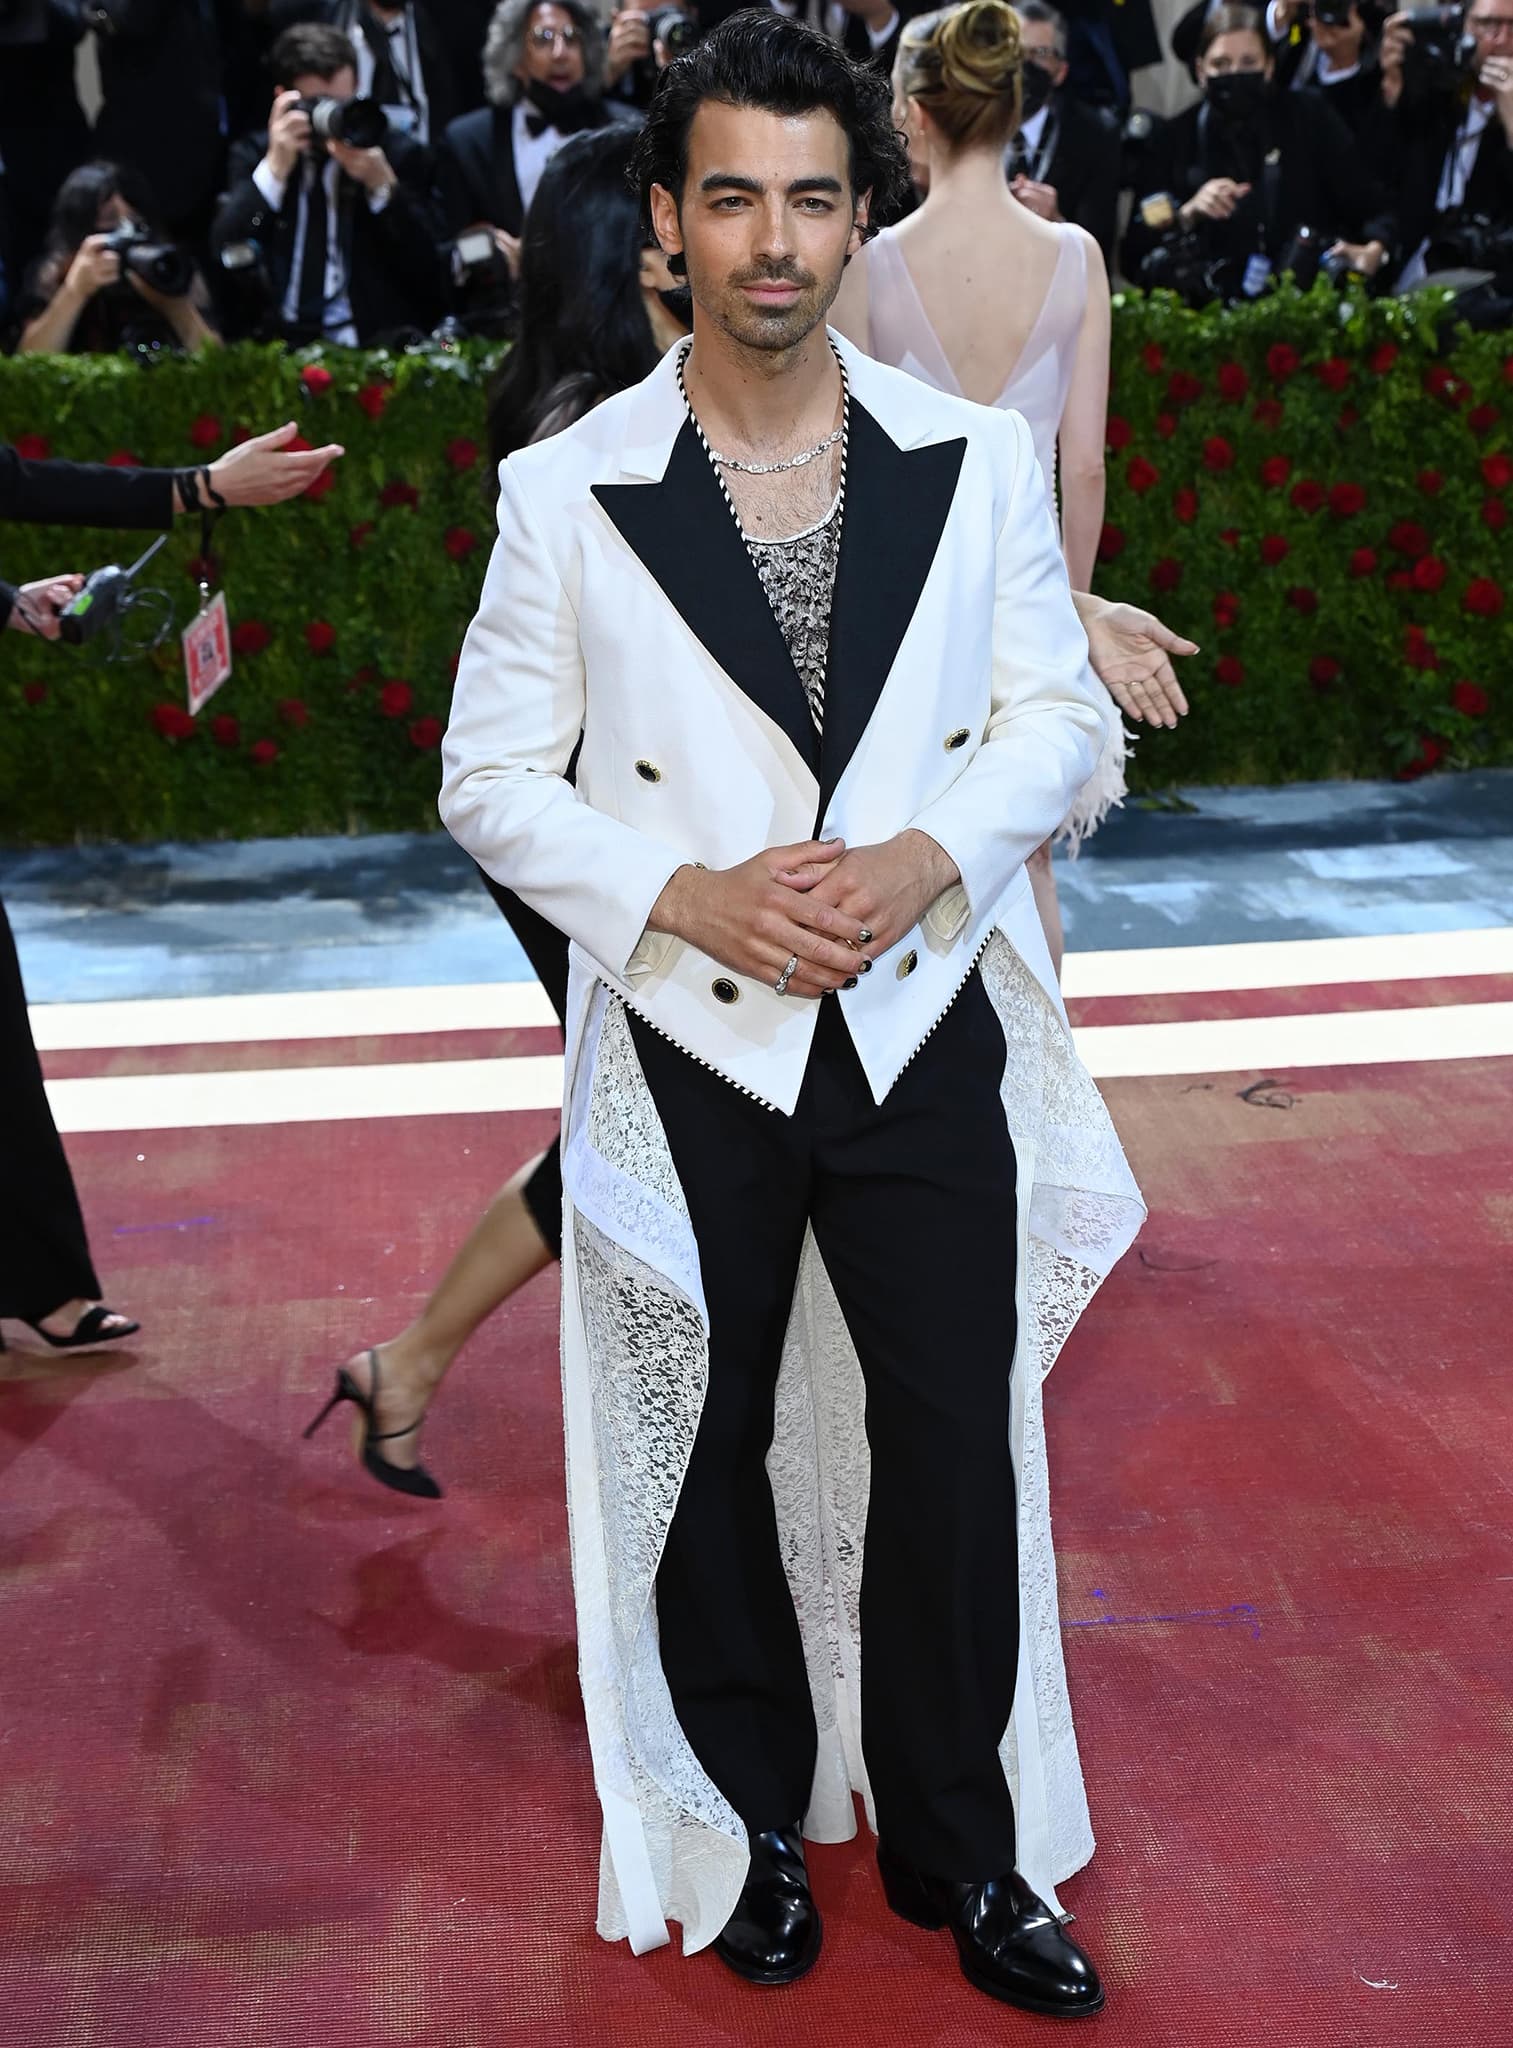 Joe Jonas dons a womenswear whitetail jacket and lacy top with a white tuxedo